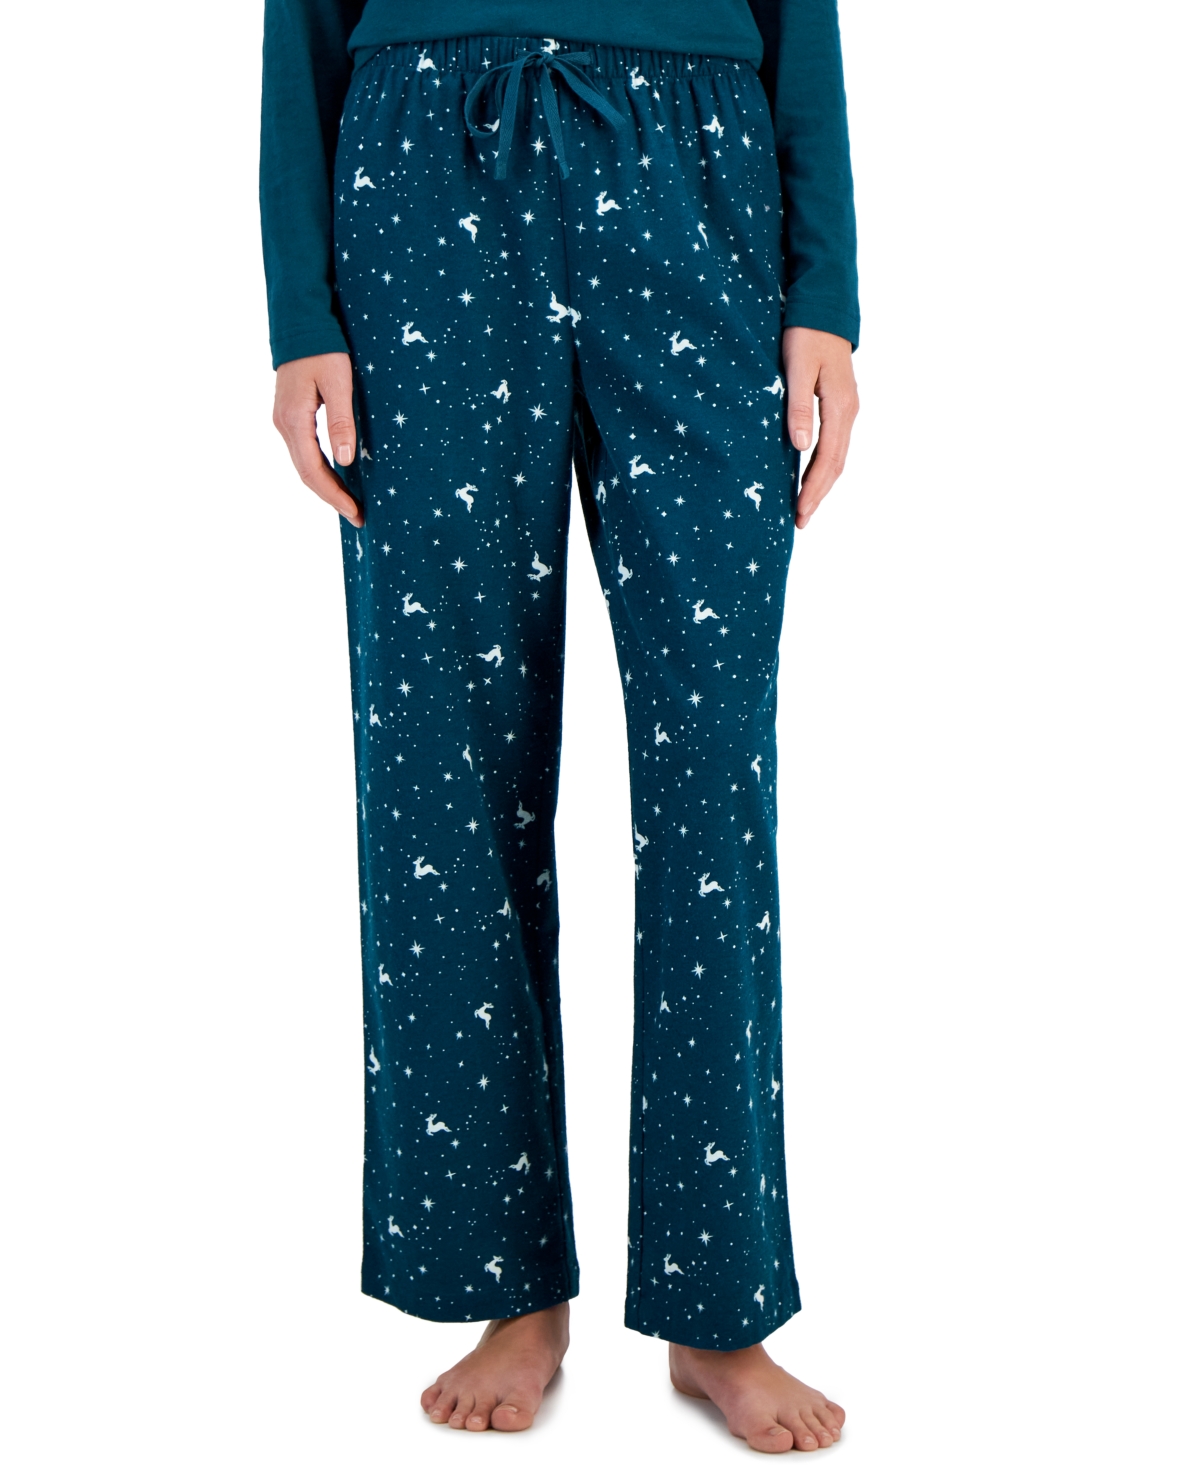 CHARTER CLUB WOMEN'S COTTON FLANNEL PAJAMA PANTS, CREATED FOR MACY'S